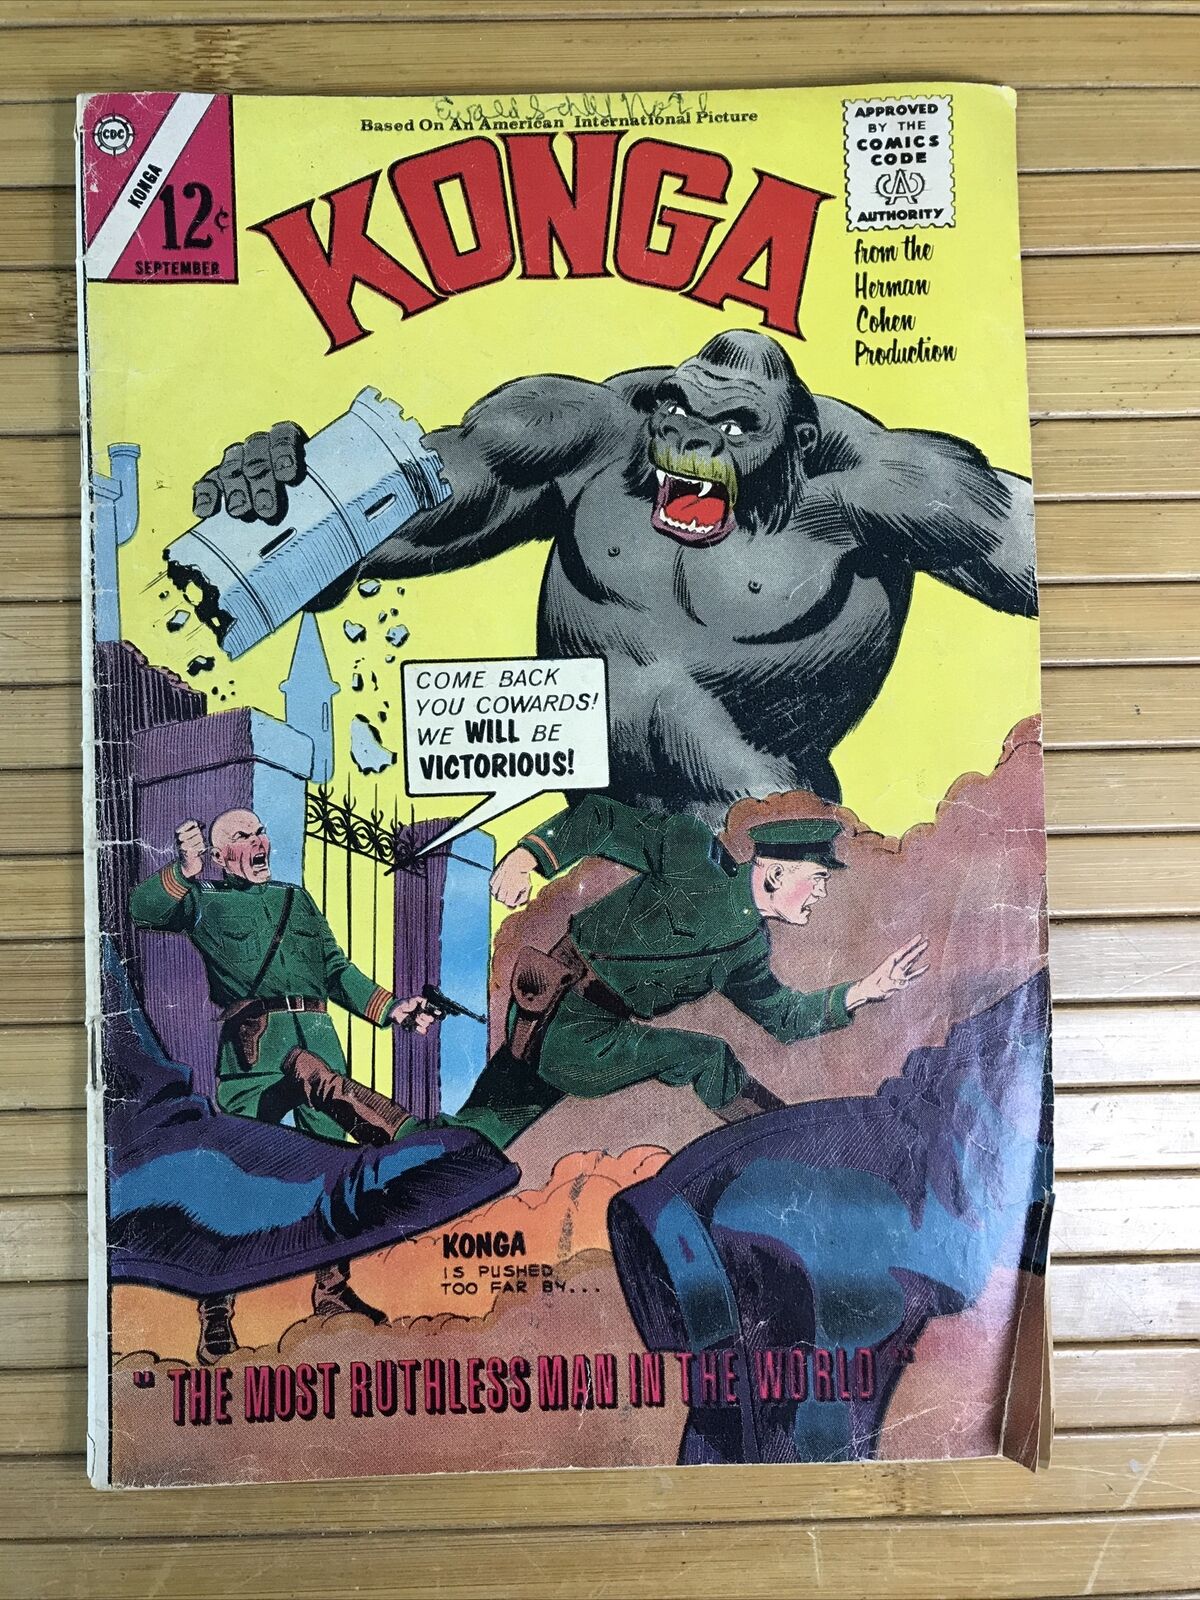 1964 KONGA “the Most Ruthless Man In The World” Vol.1 #19 Vintage Rare.